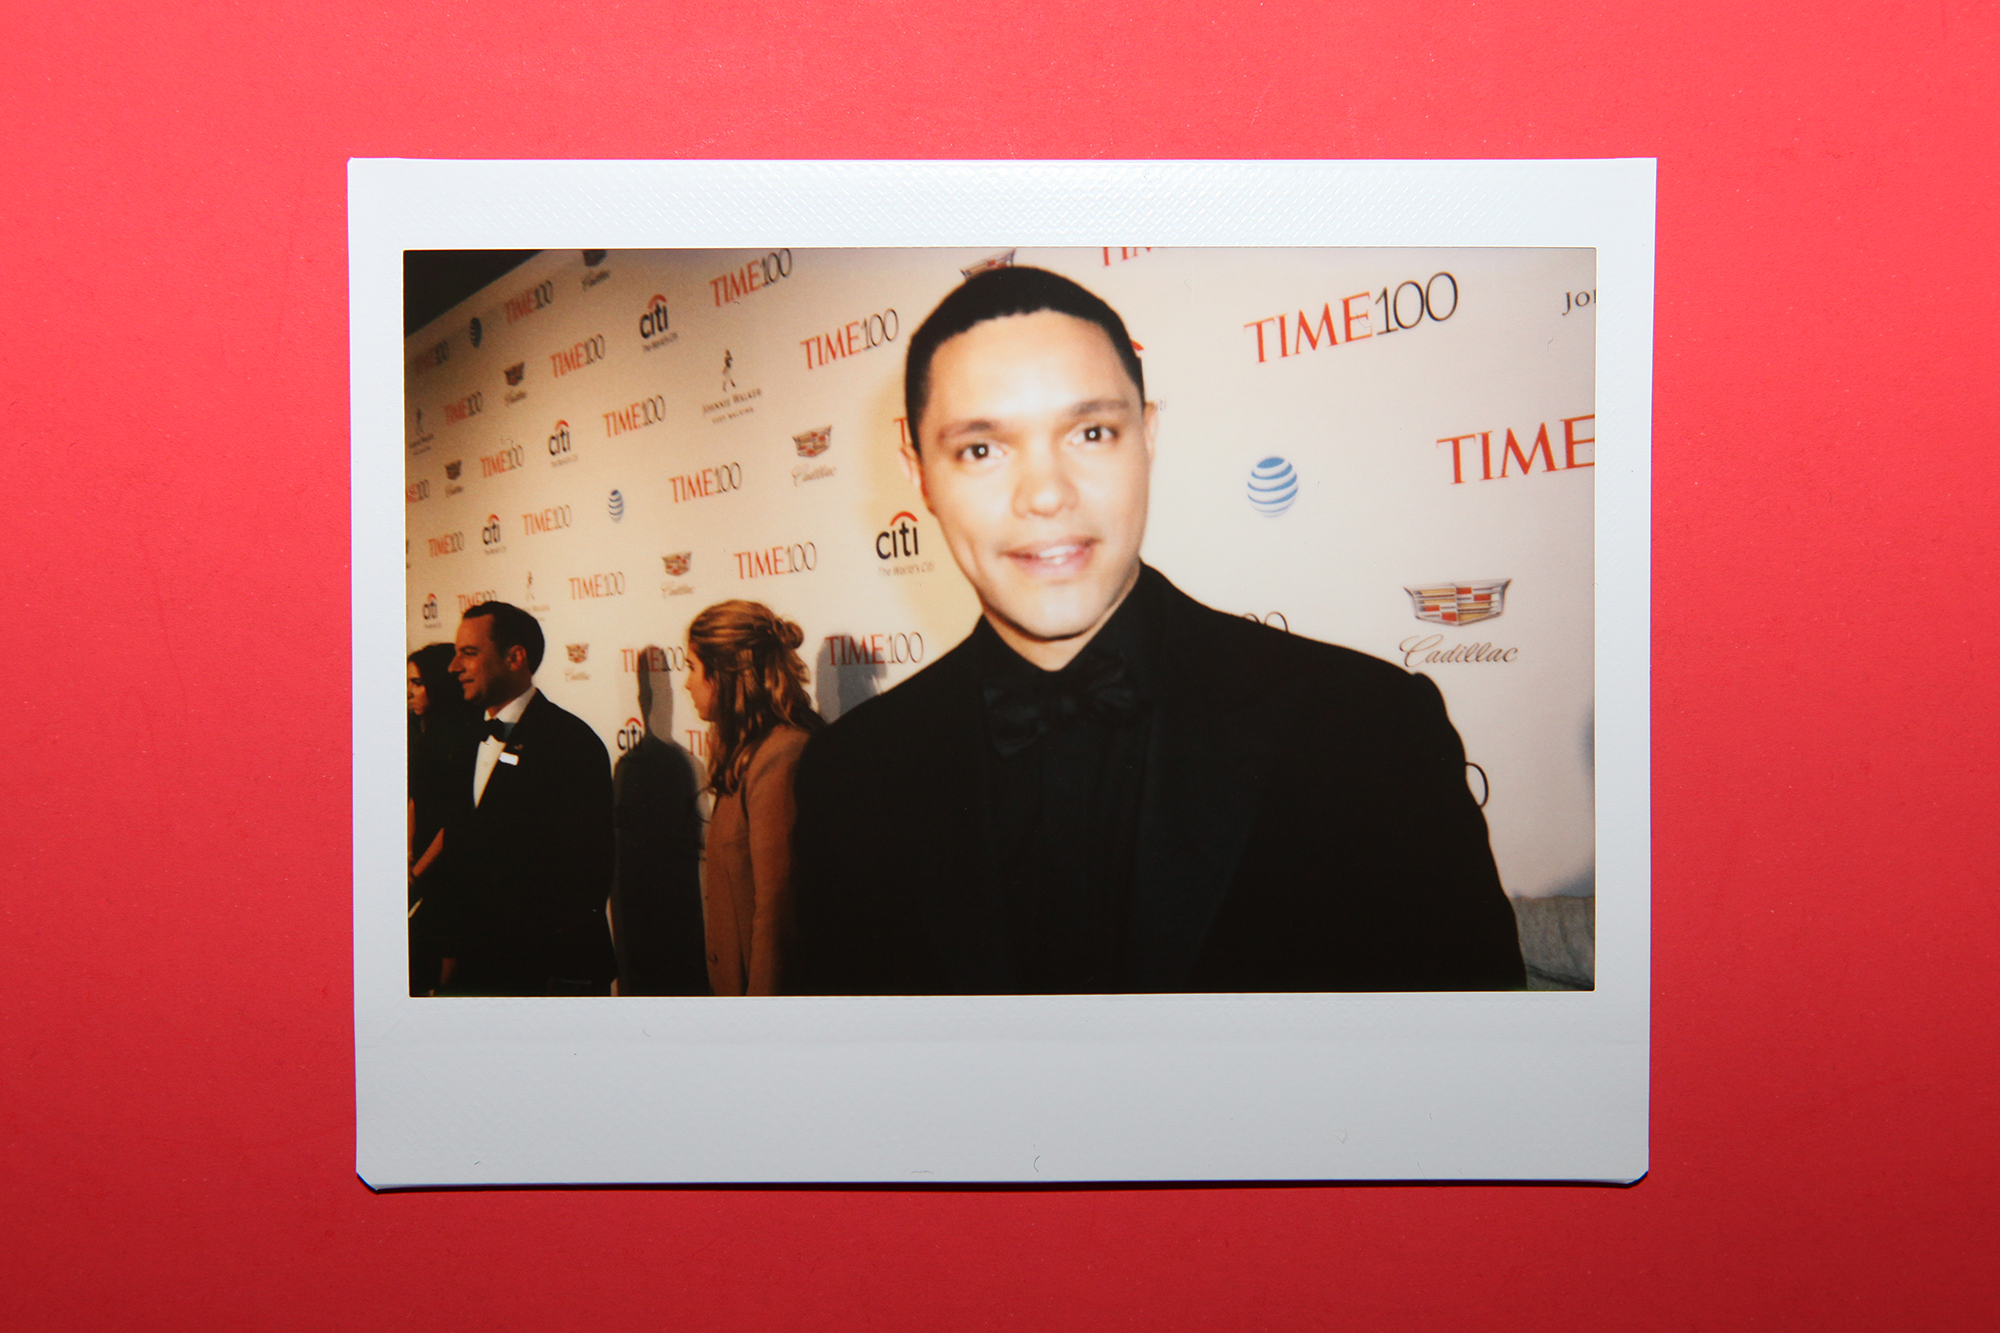 Trevor Noah arrives at the TIME 100 Gala at the Time Warner Center on April 26, 2016 in New York City.